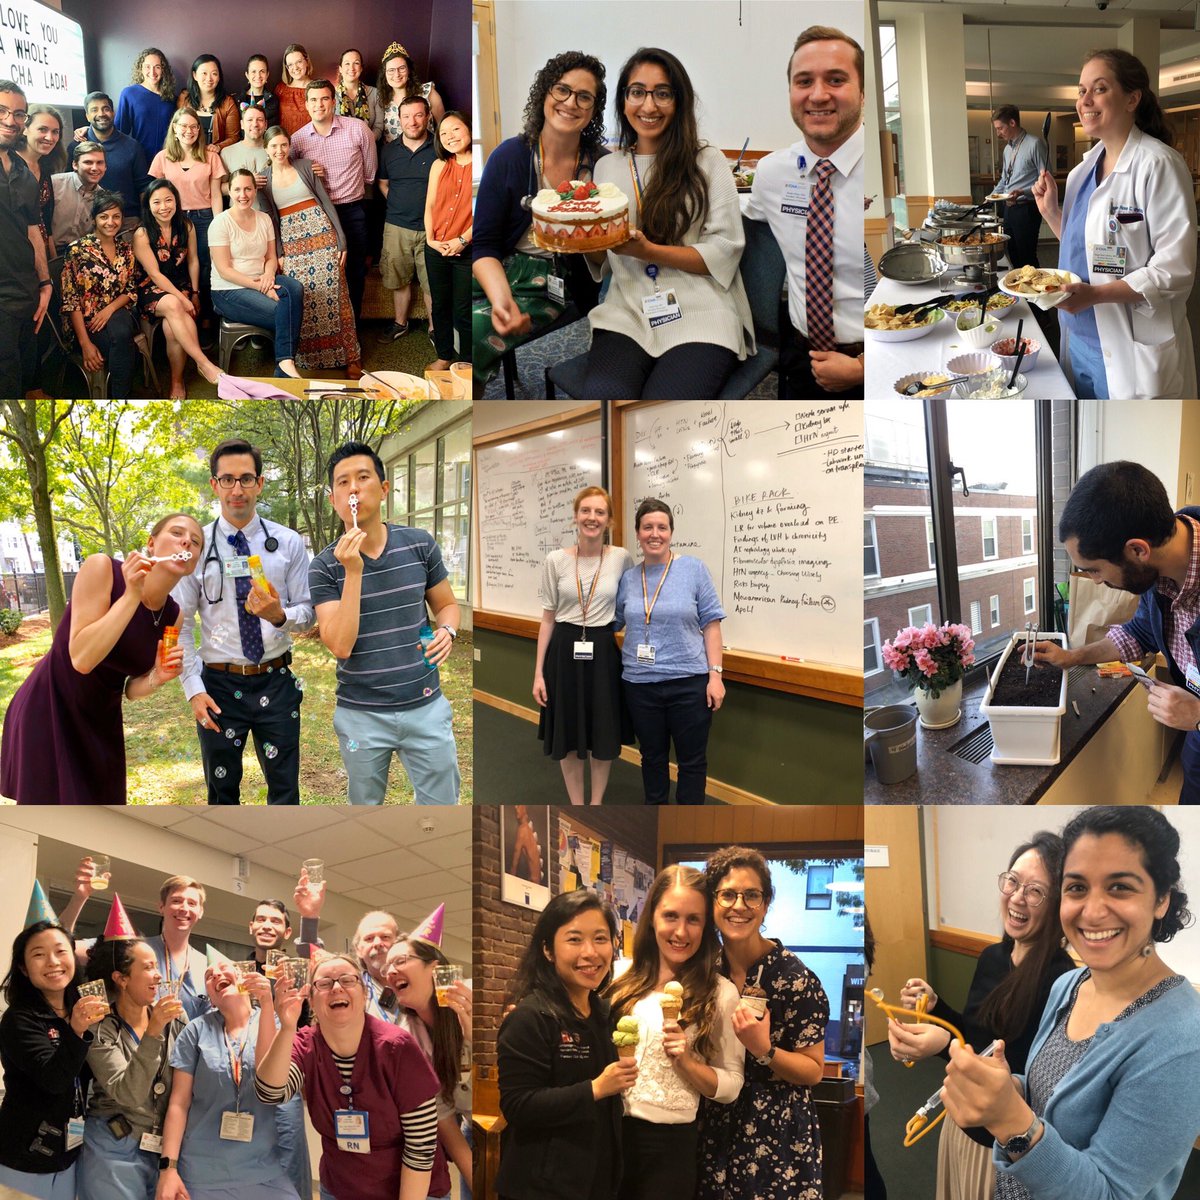 Grateful to share those moments that are joyful, sad, & everything in between with this group! Reflecting on the past year, & can’t wait for all that is in store in 2020! #topnine2019 @challiance @RachelStarkMD @Pr1yankJa1n @RebeccaRogersMD #Match2020